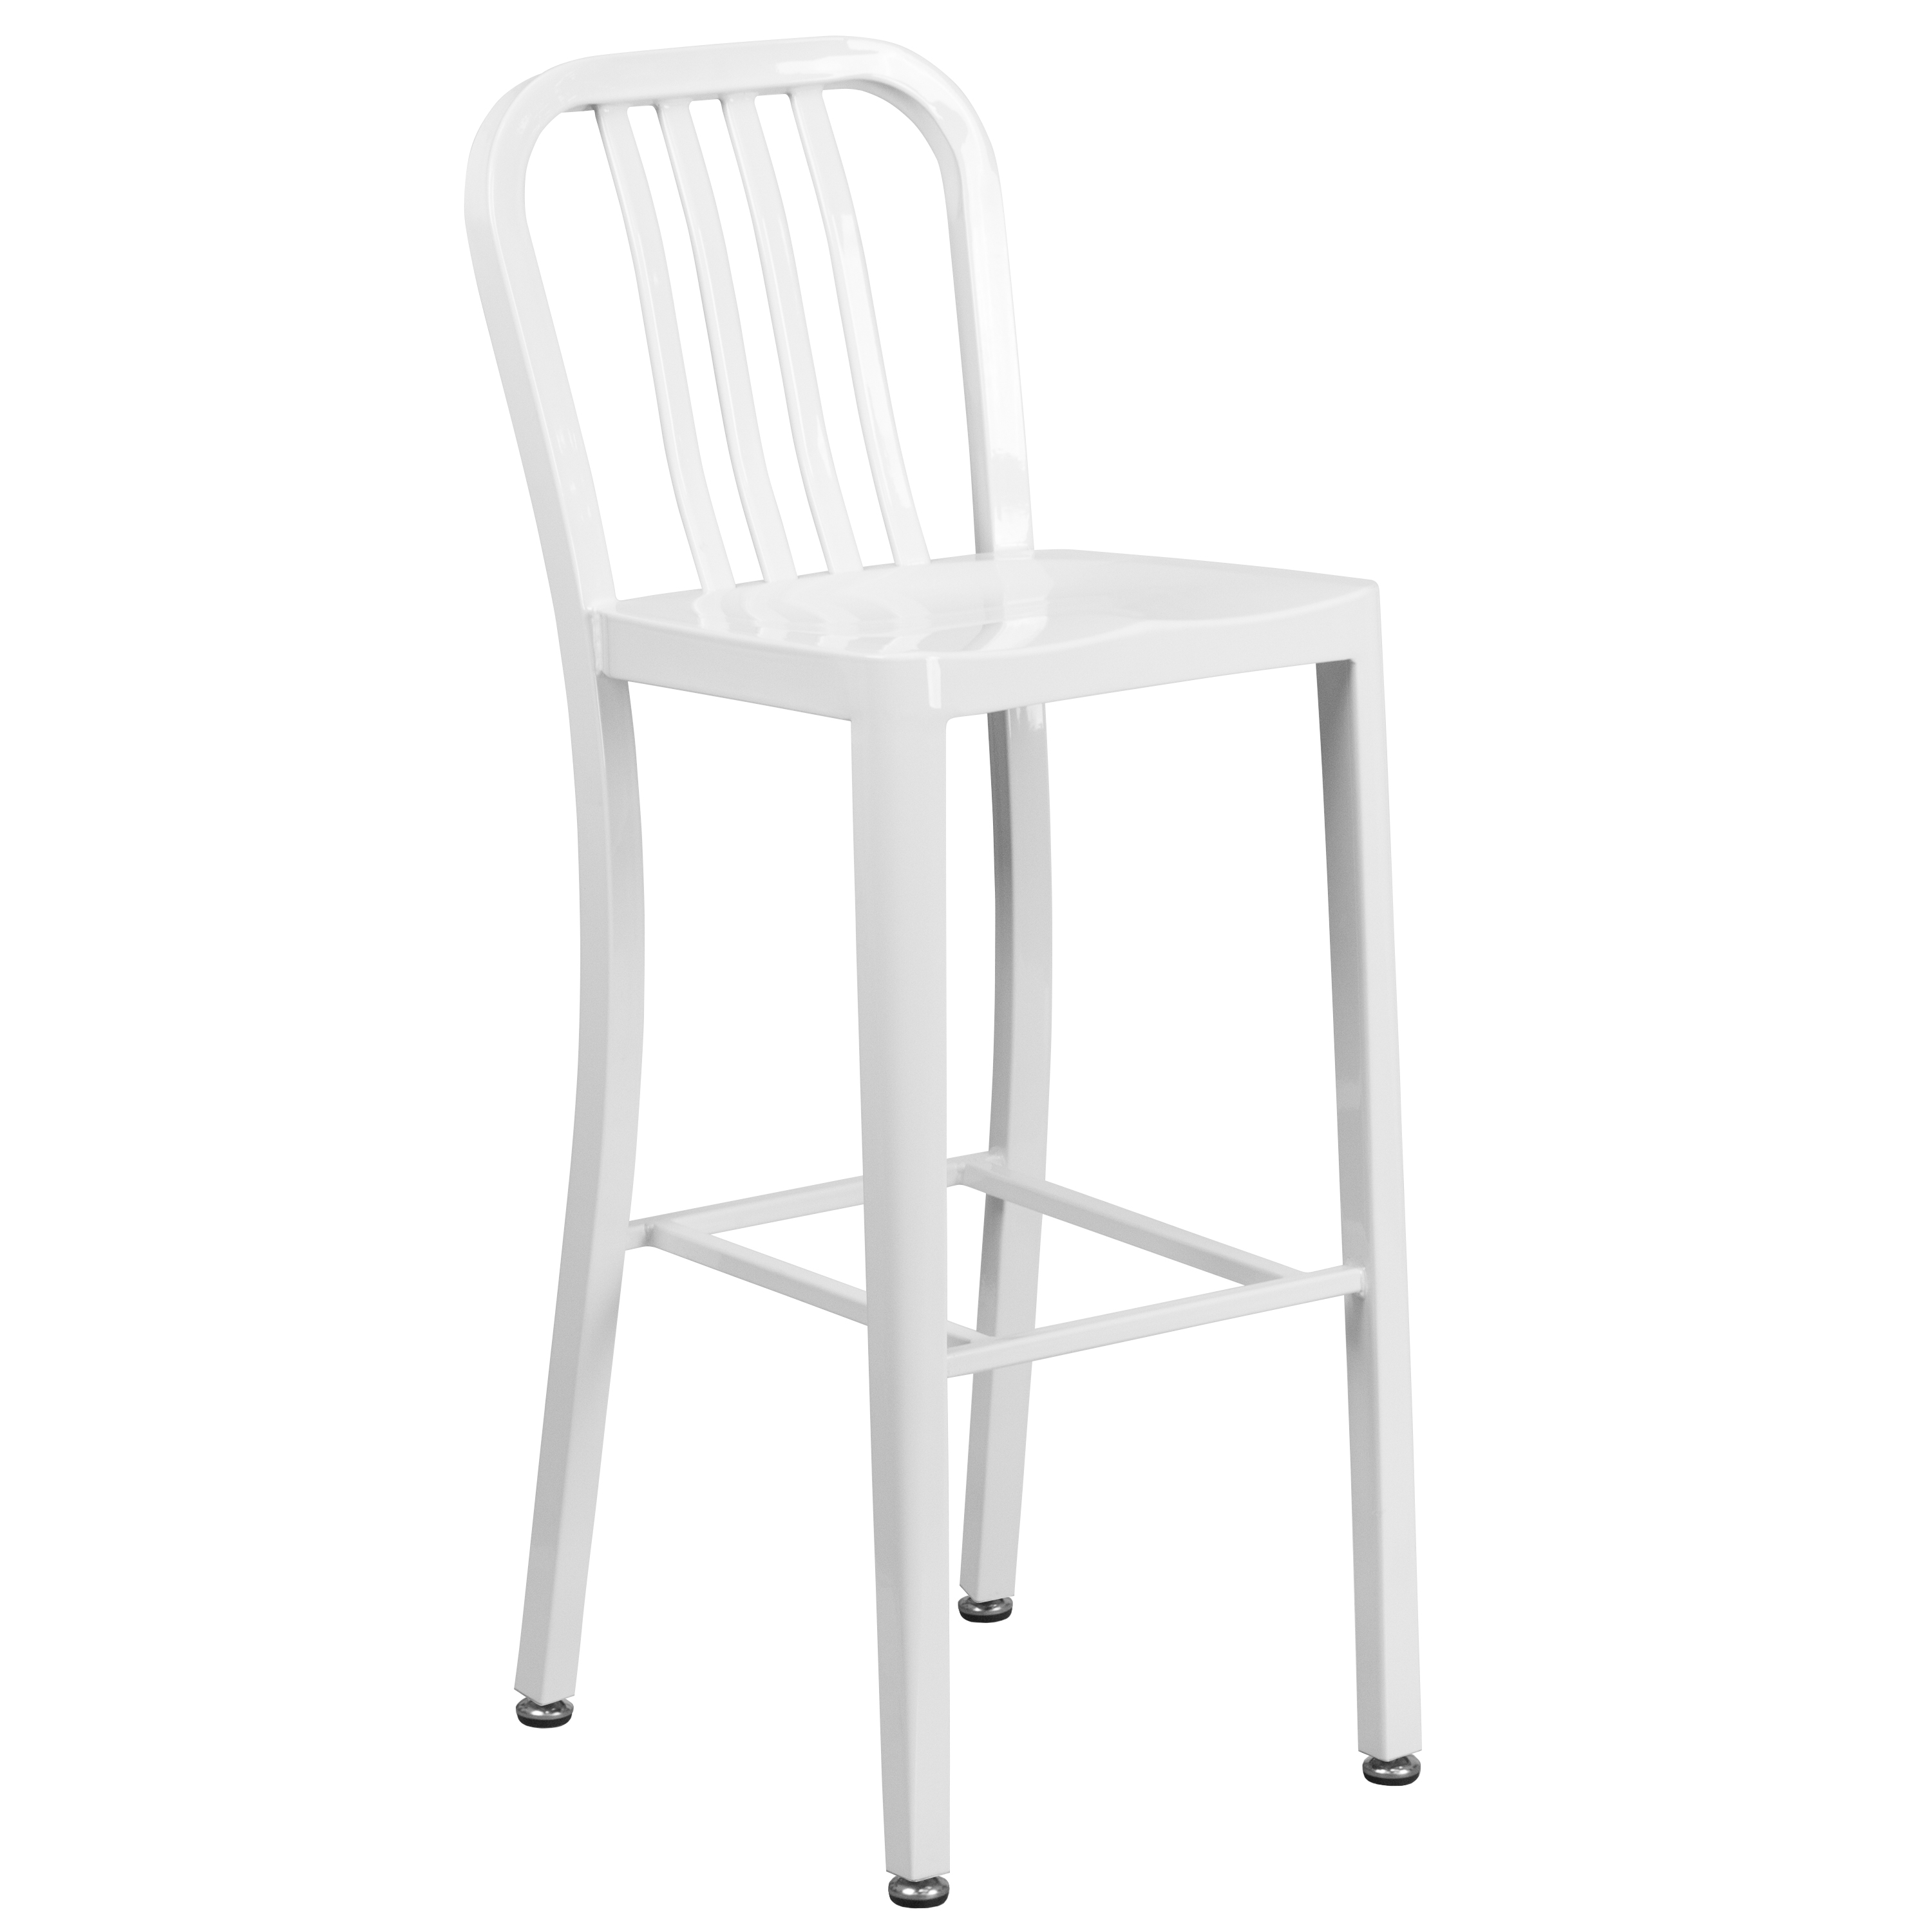 Flash Furniture Brad Commercial Grade 30" Round White Metal Indoor-Outdoor Bar Table Set with 2 Vertical Slat Back Stools - image 5 of 5